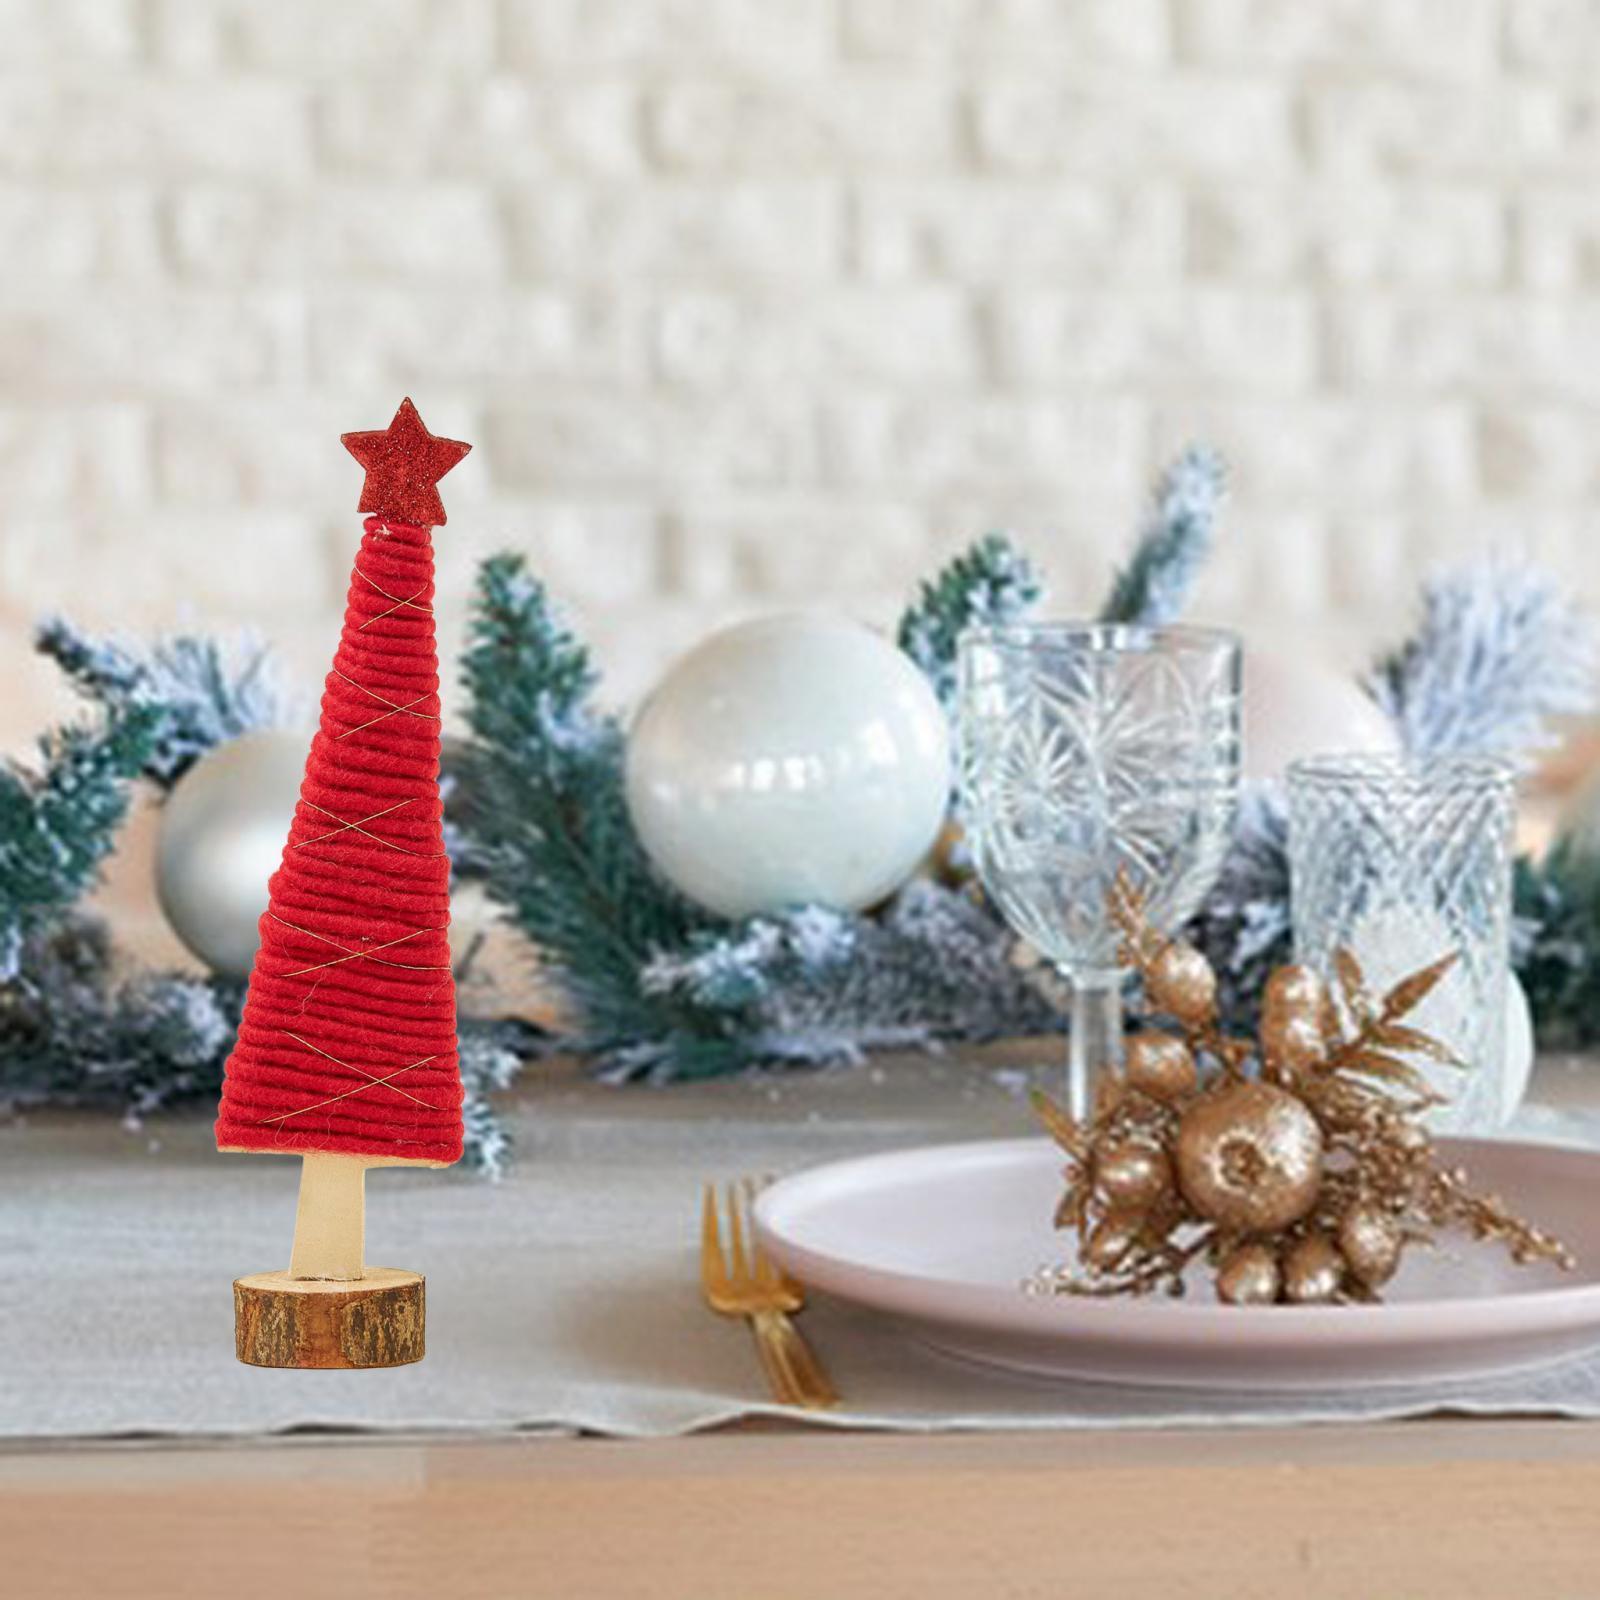 Christmas Tabletop Decorations Christmas Centerpiece for Home Office Kitchen